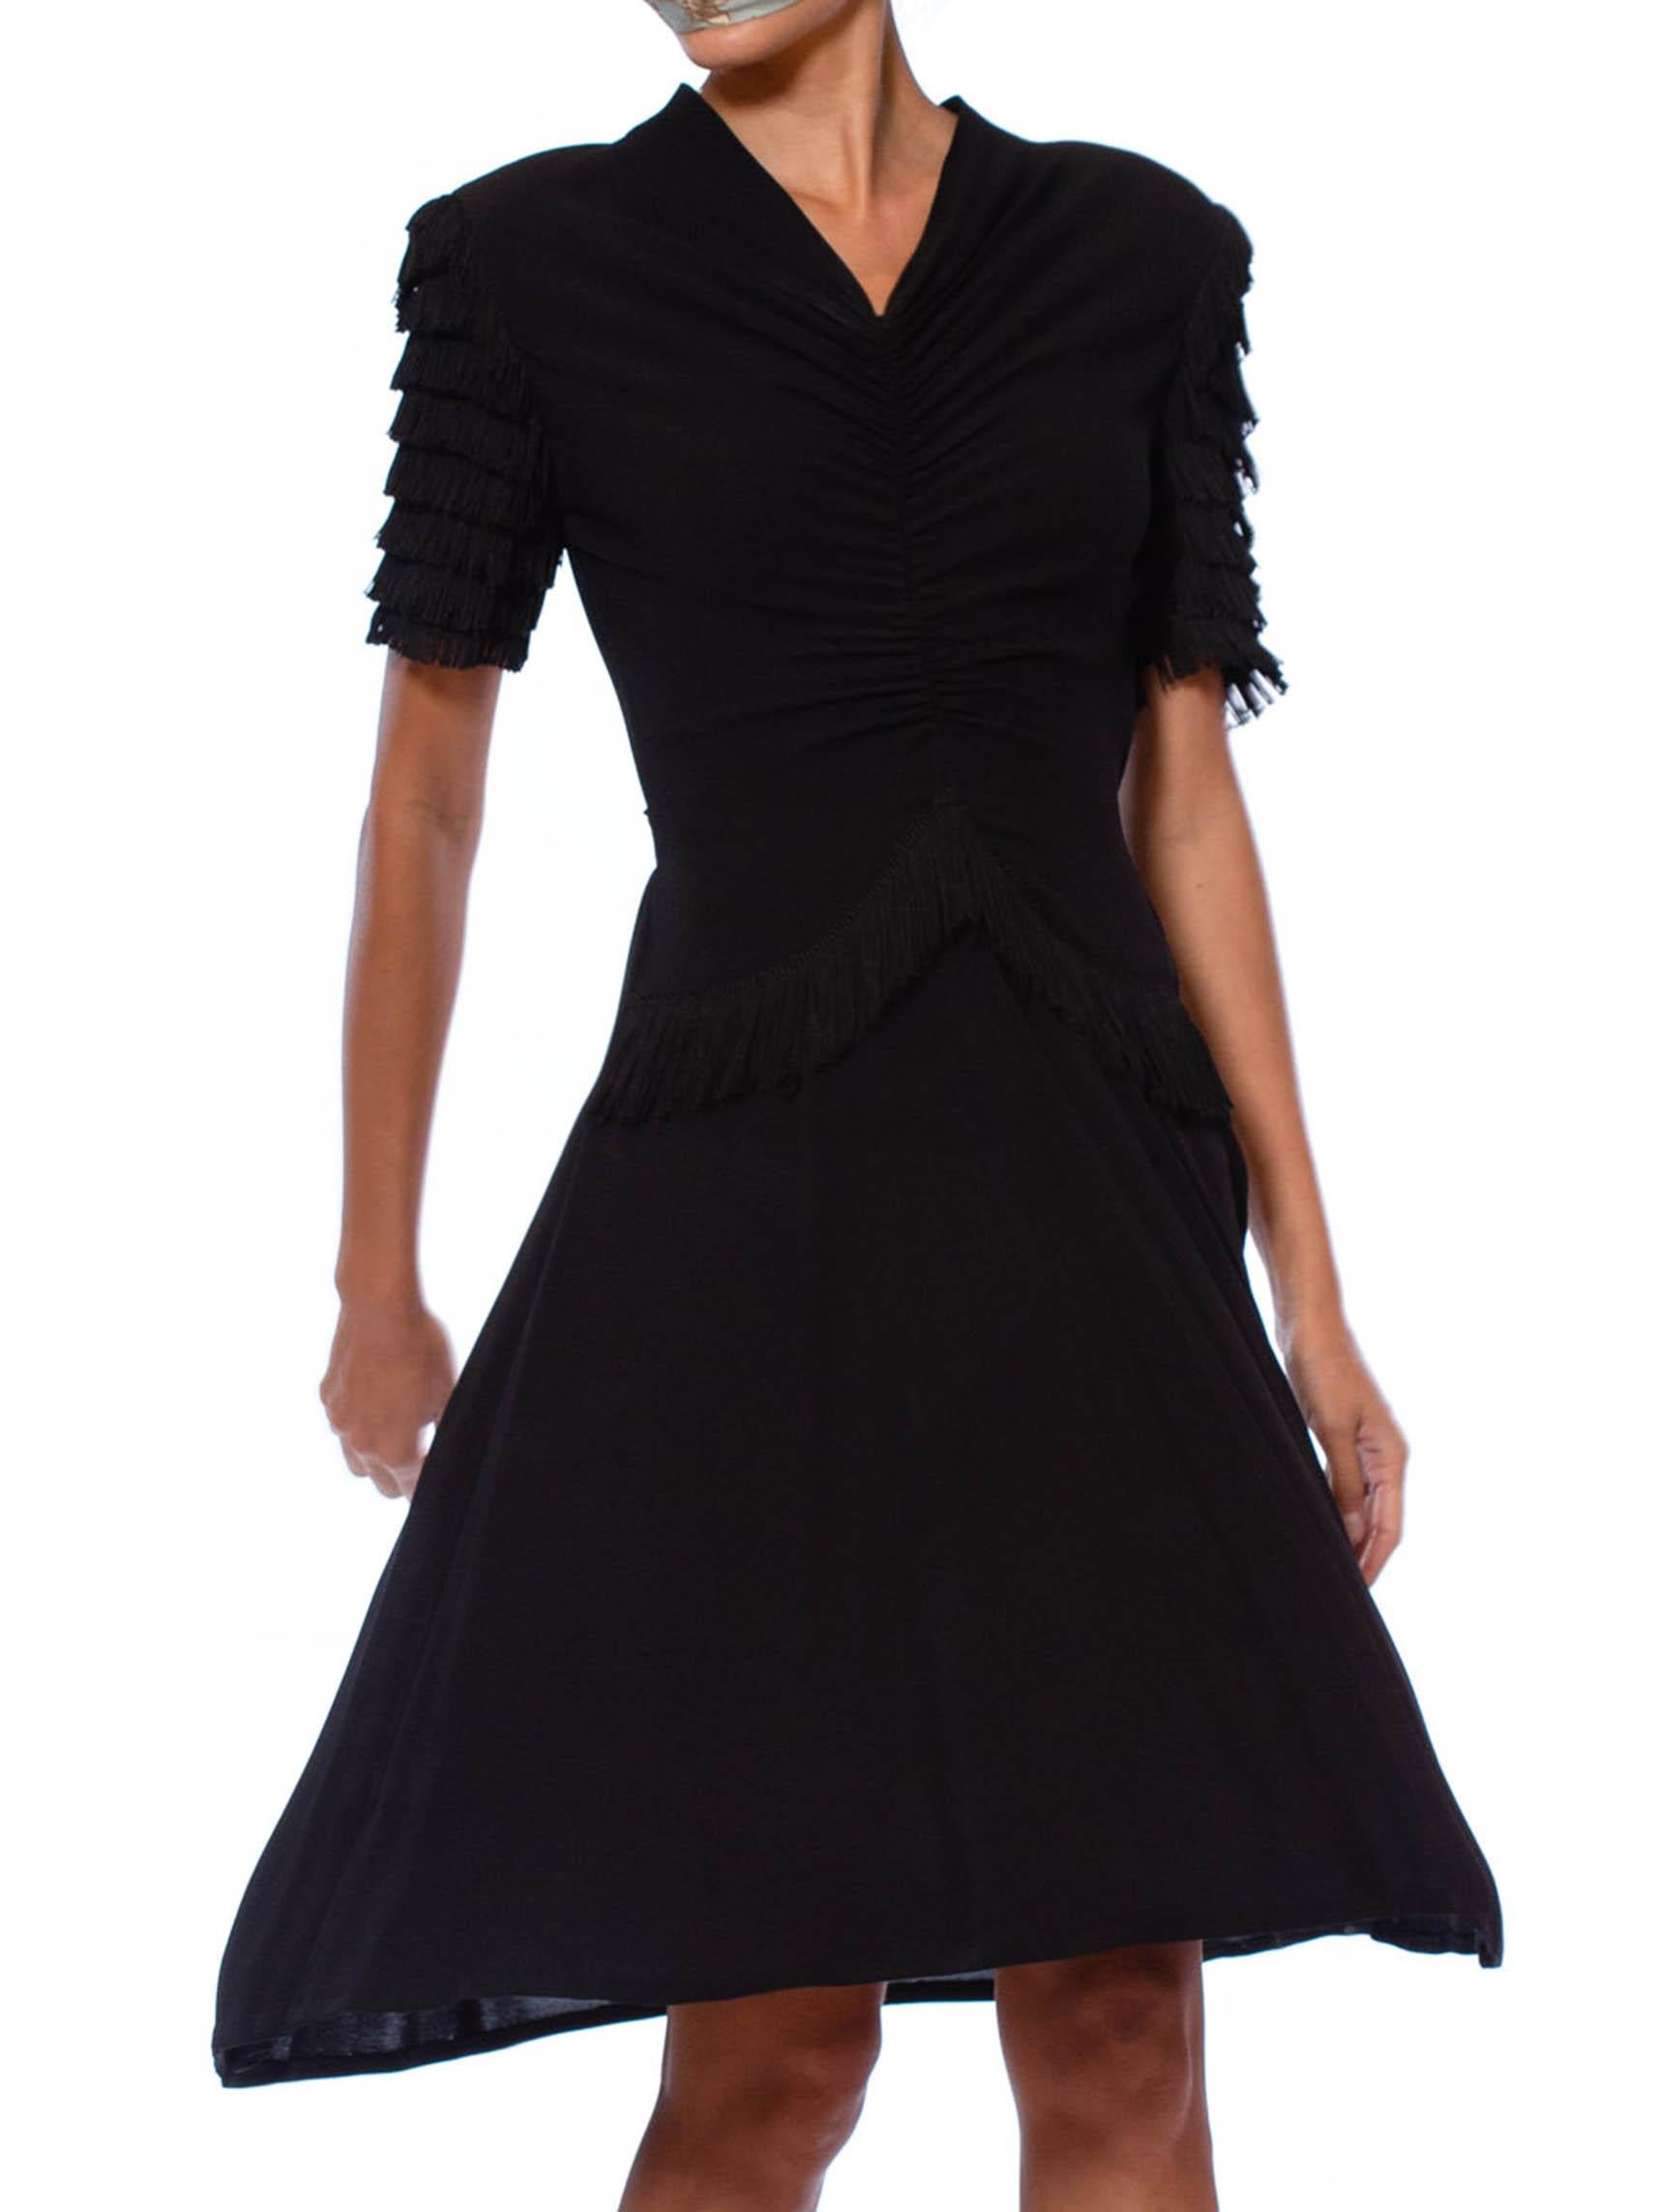 1940S Black Rayon Crepe Shirred Front Dress With Fringe Sleeves For Sale 3